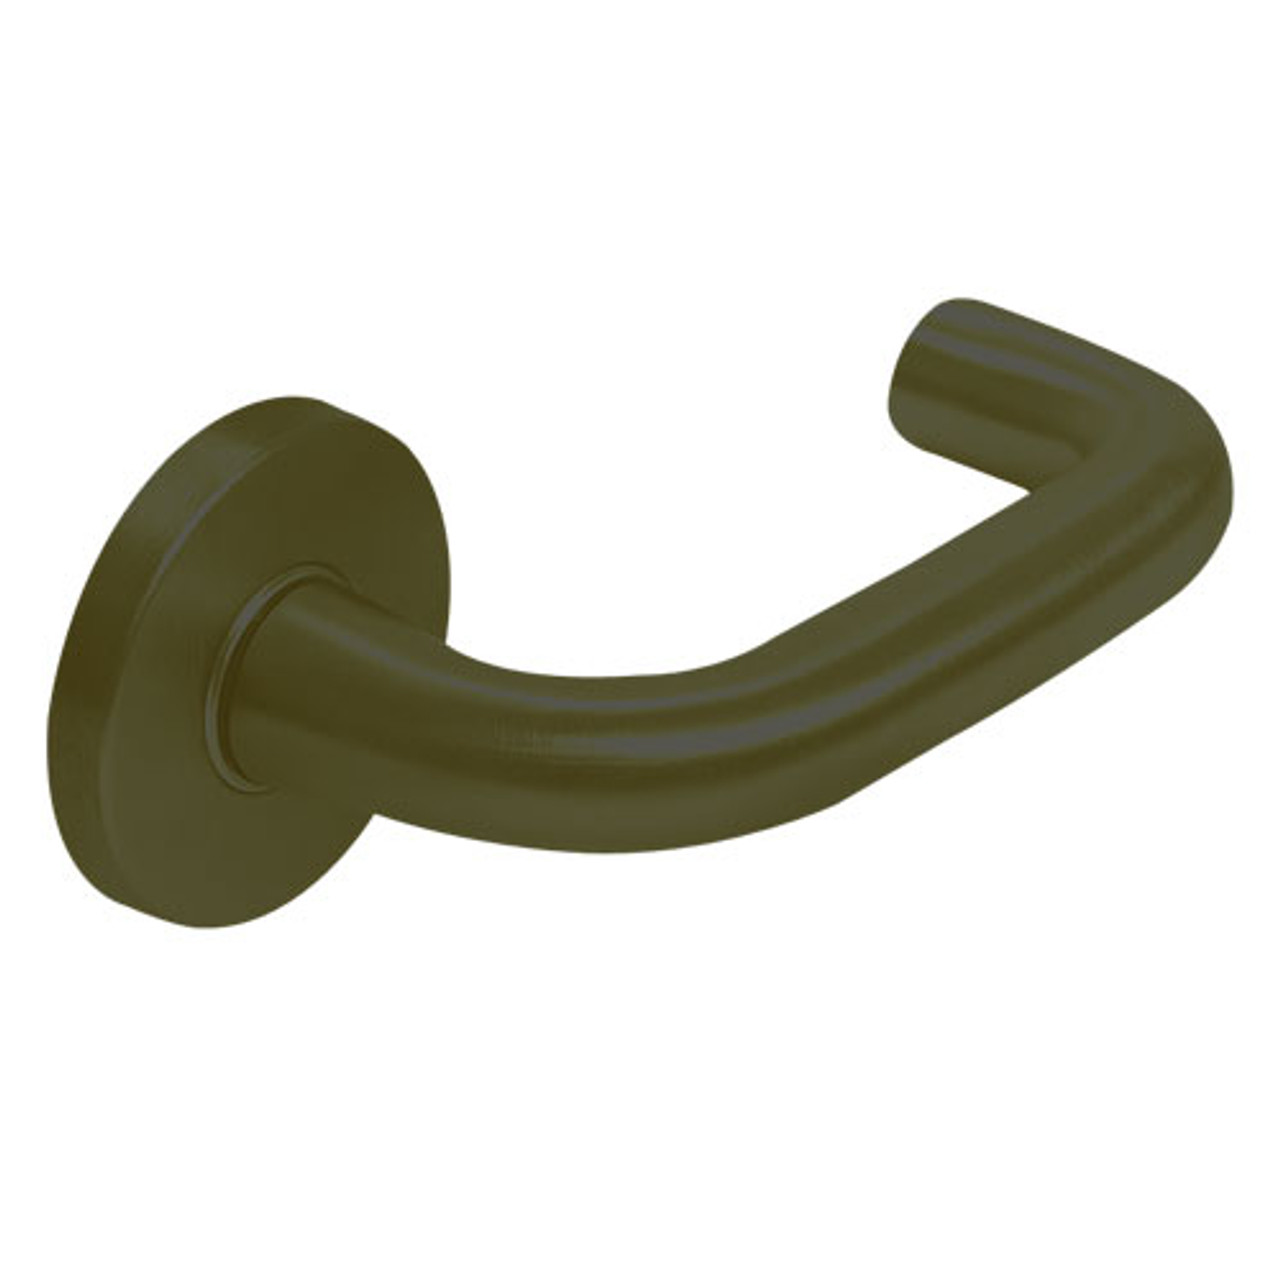 ML2042-LWF-613-M31 Corbin Russwin ML2000 Series Mortise Entrance Trim Pack with Lustra Lever in Oil Rubbed Bronze